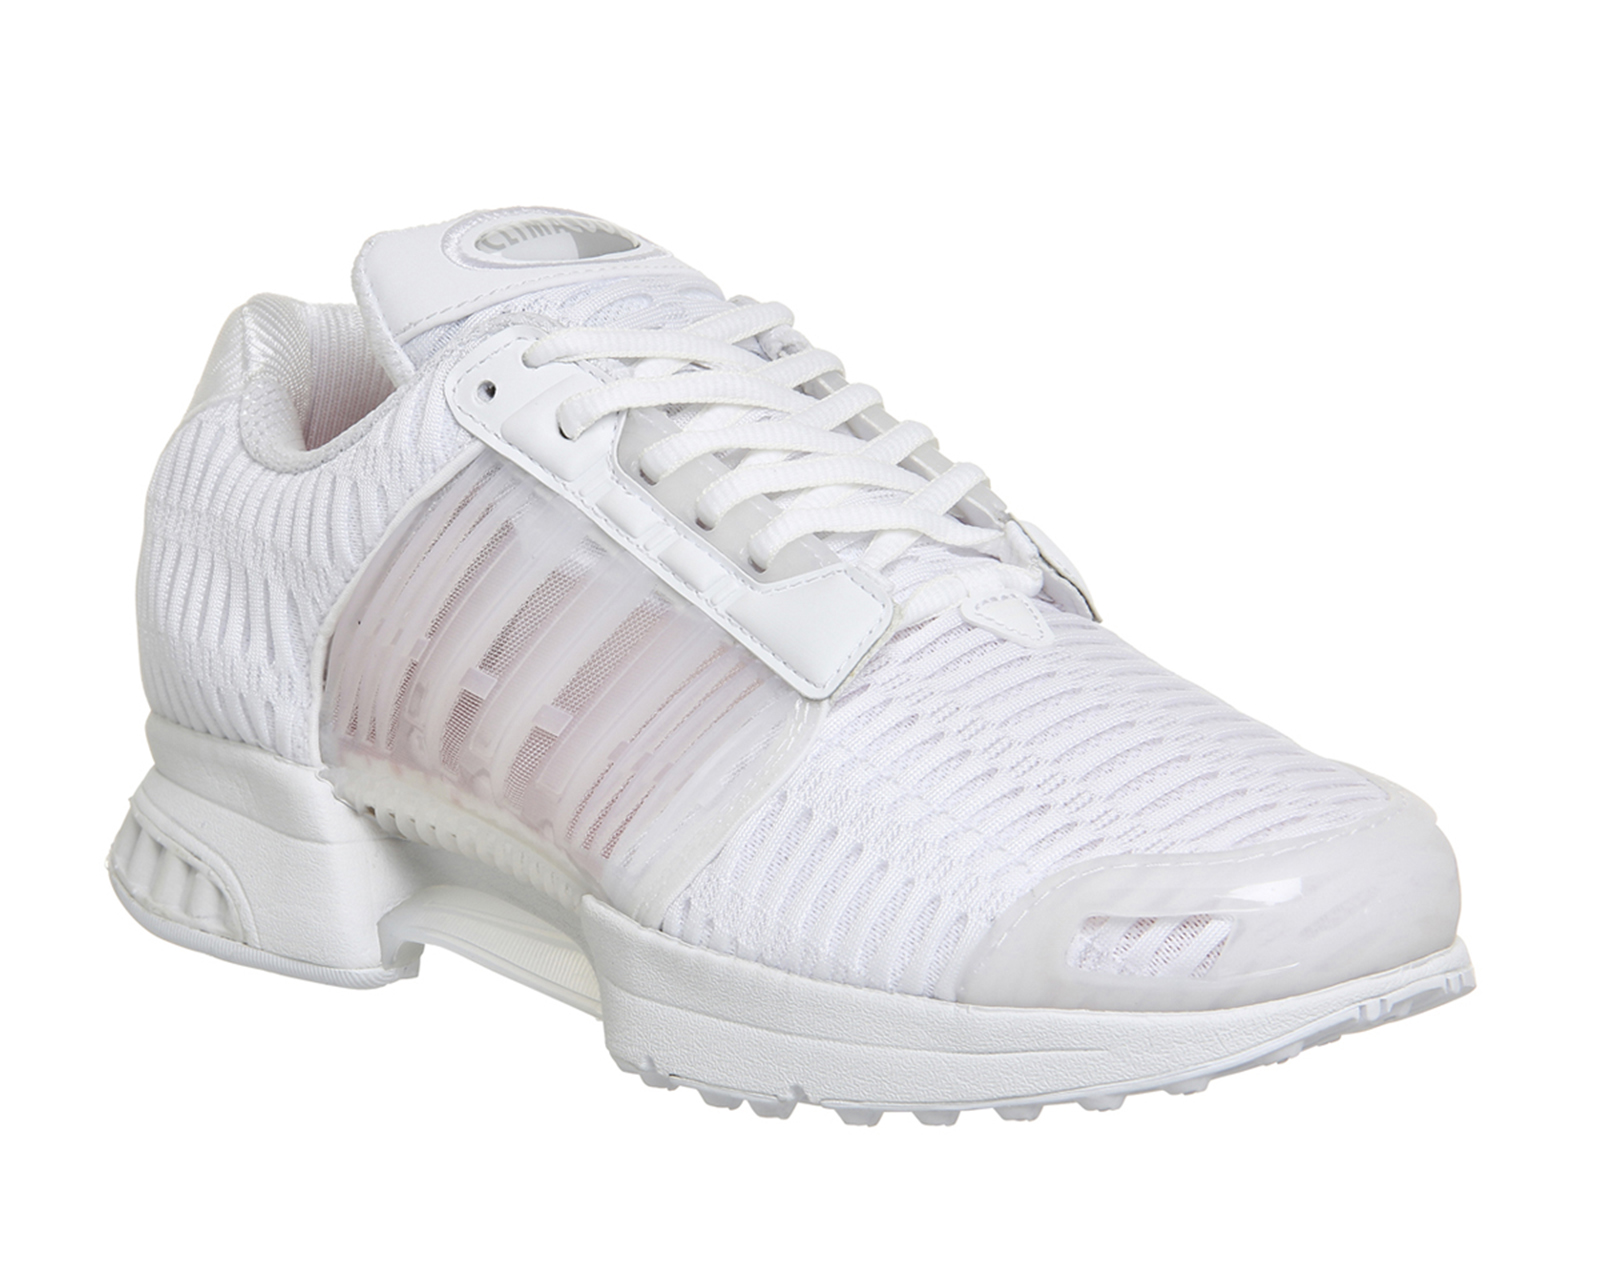 adidas climacool 1 all white